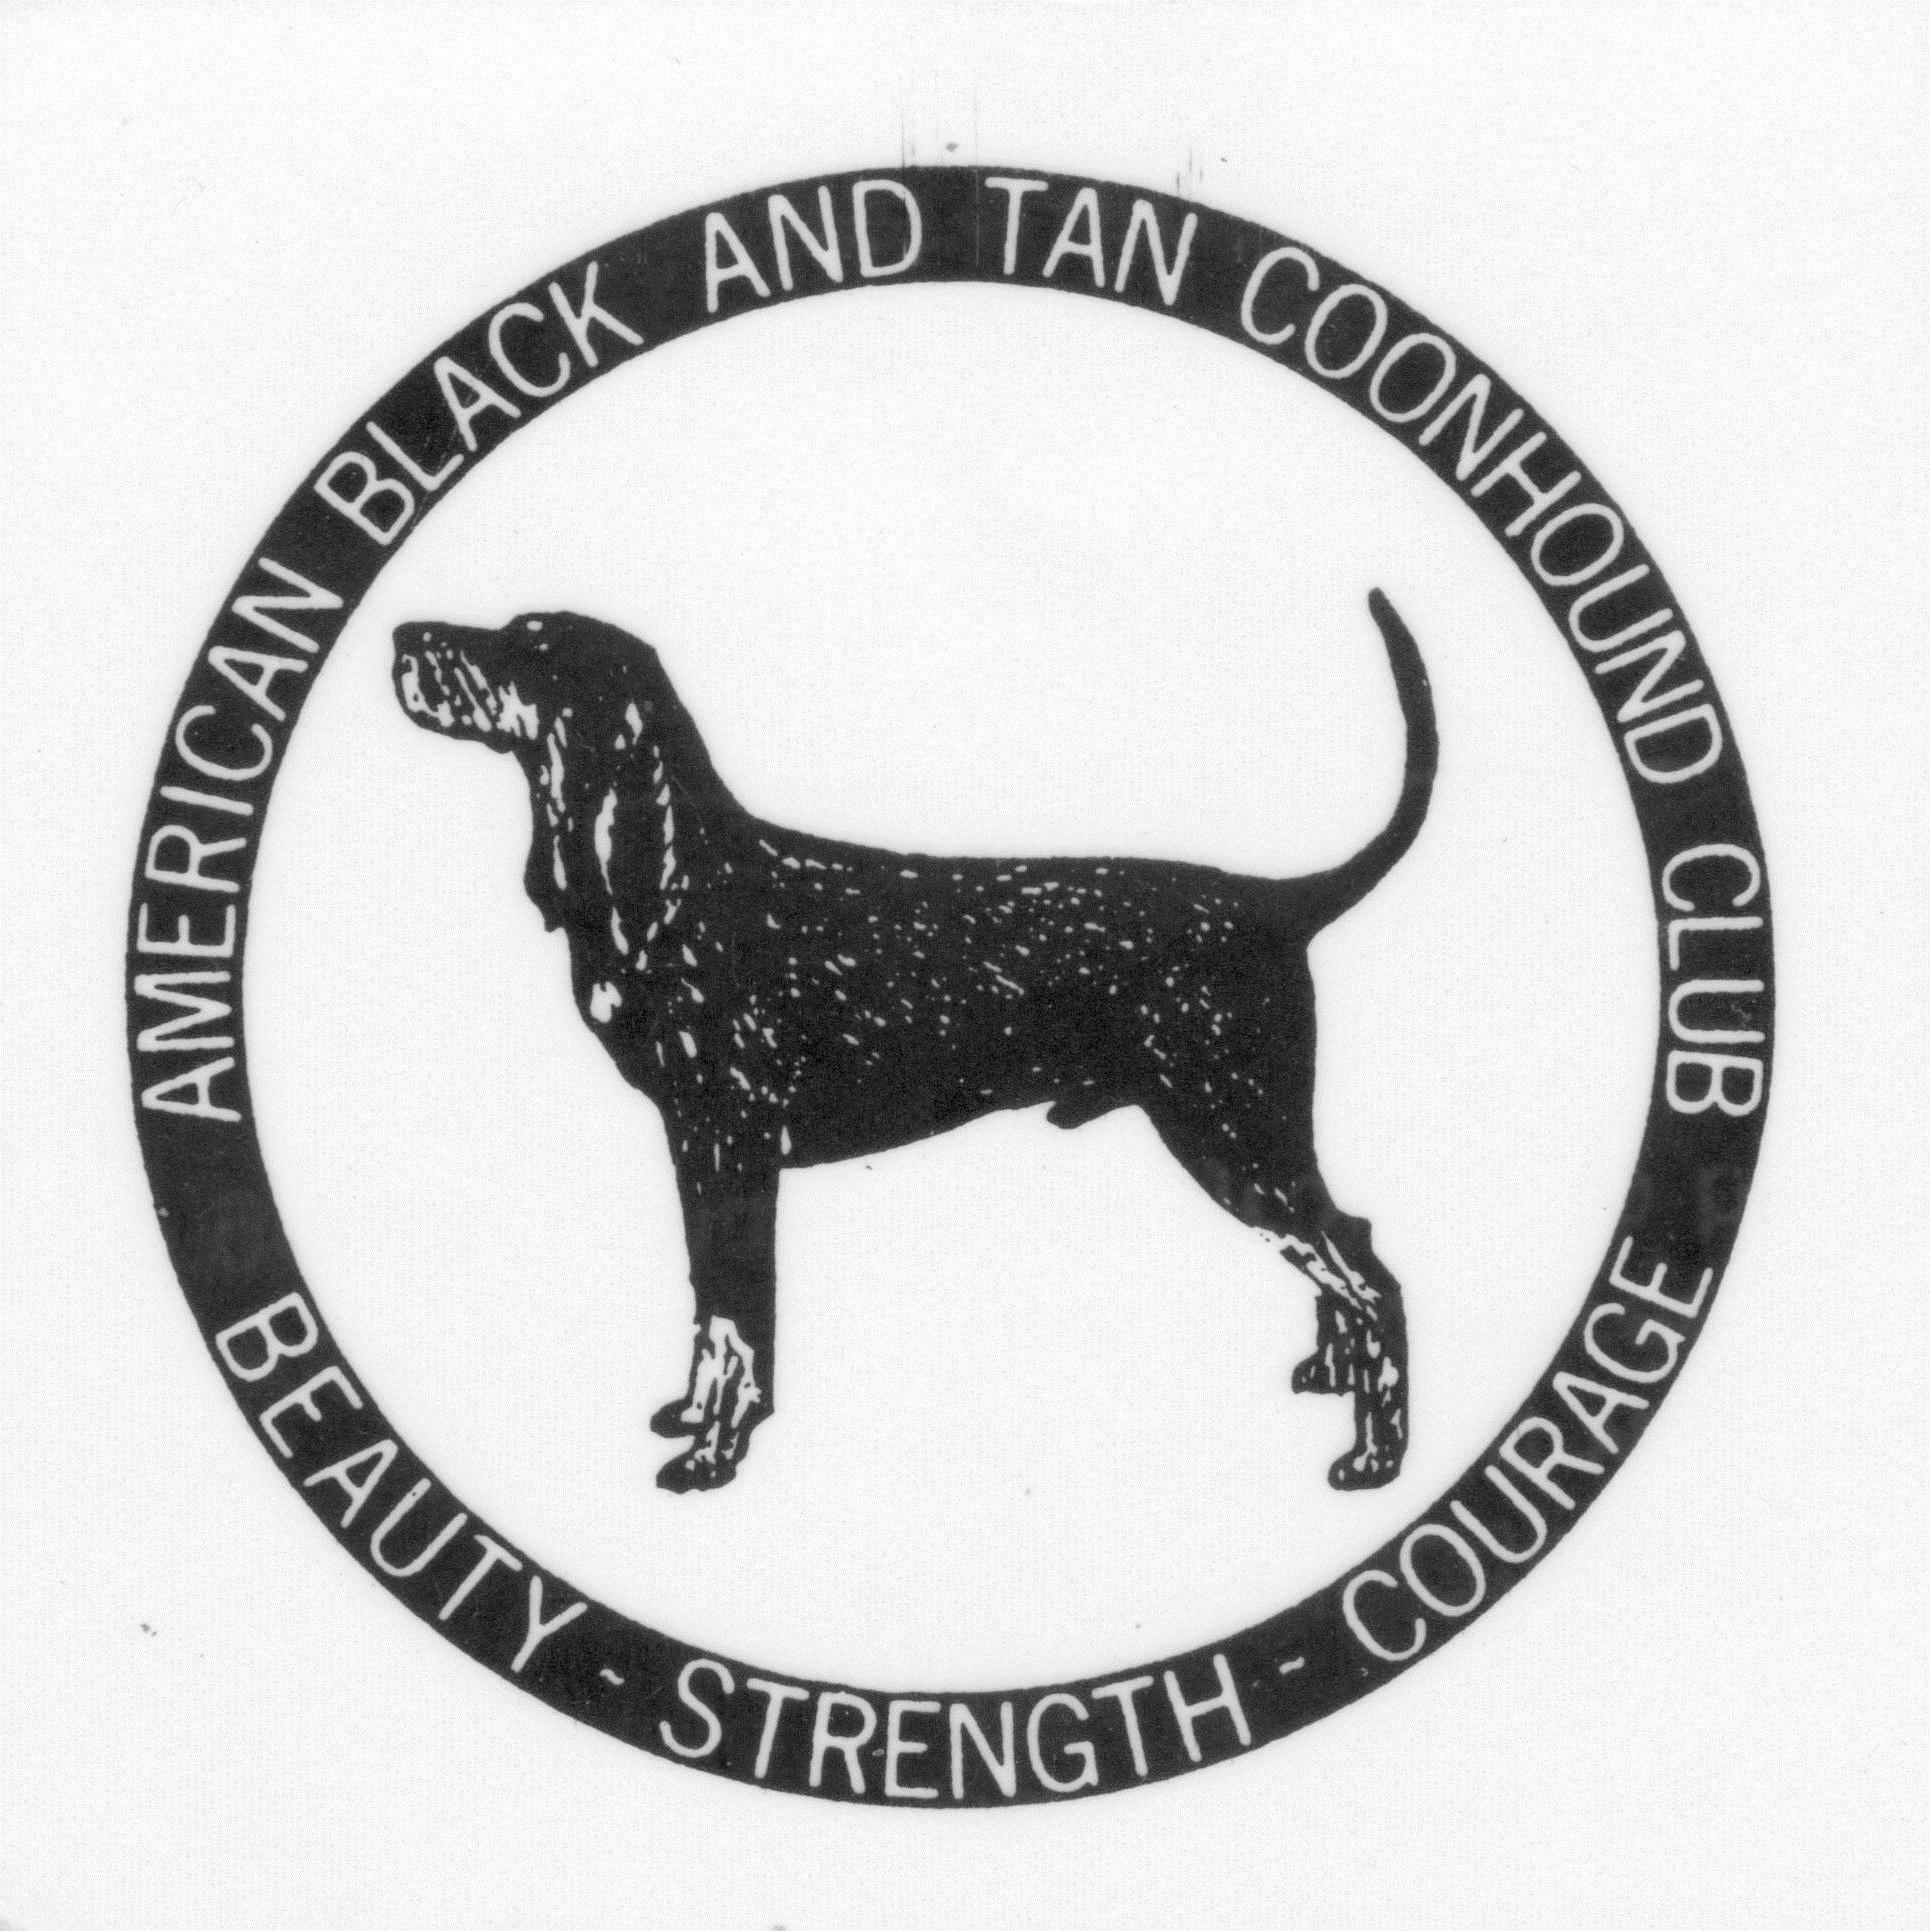 Coonhound Logo - American Black and Tan Coonhound Club